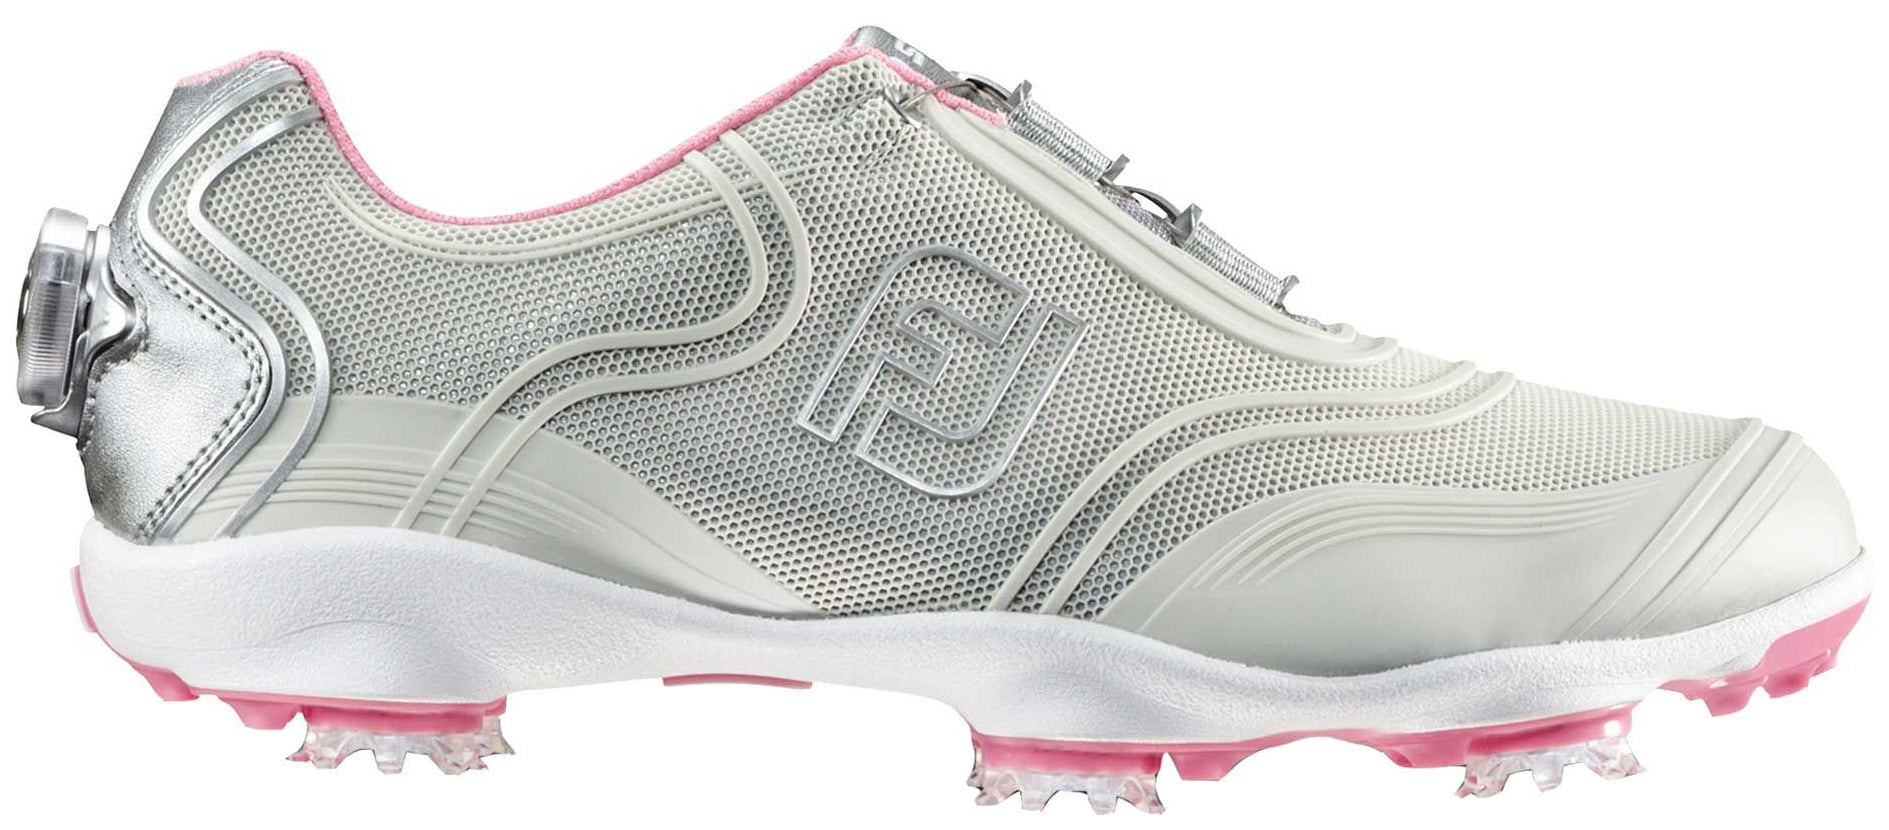 motion control golf shoes